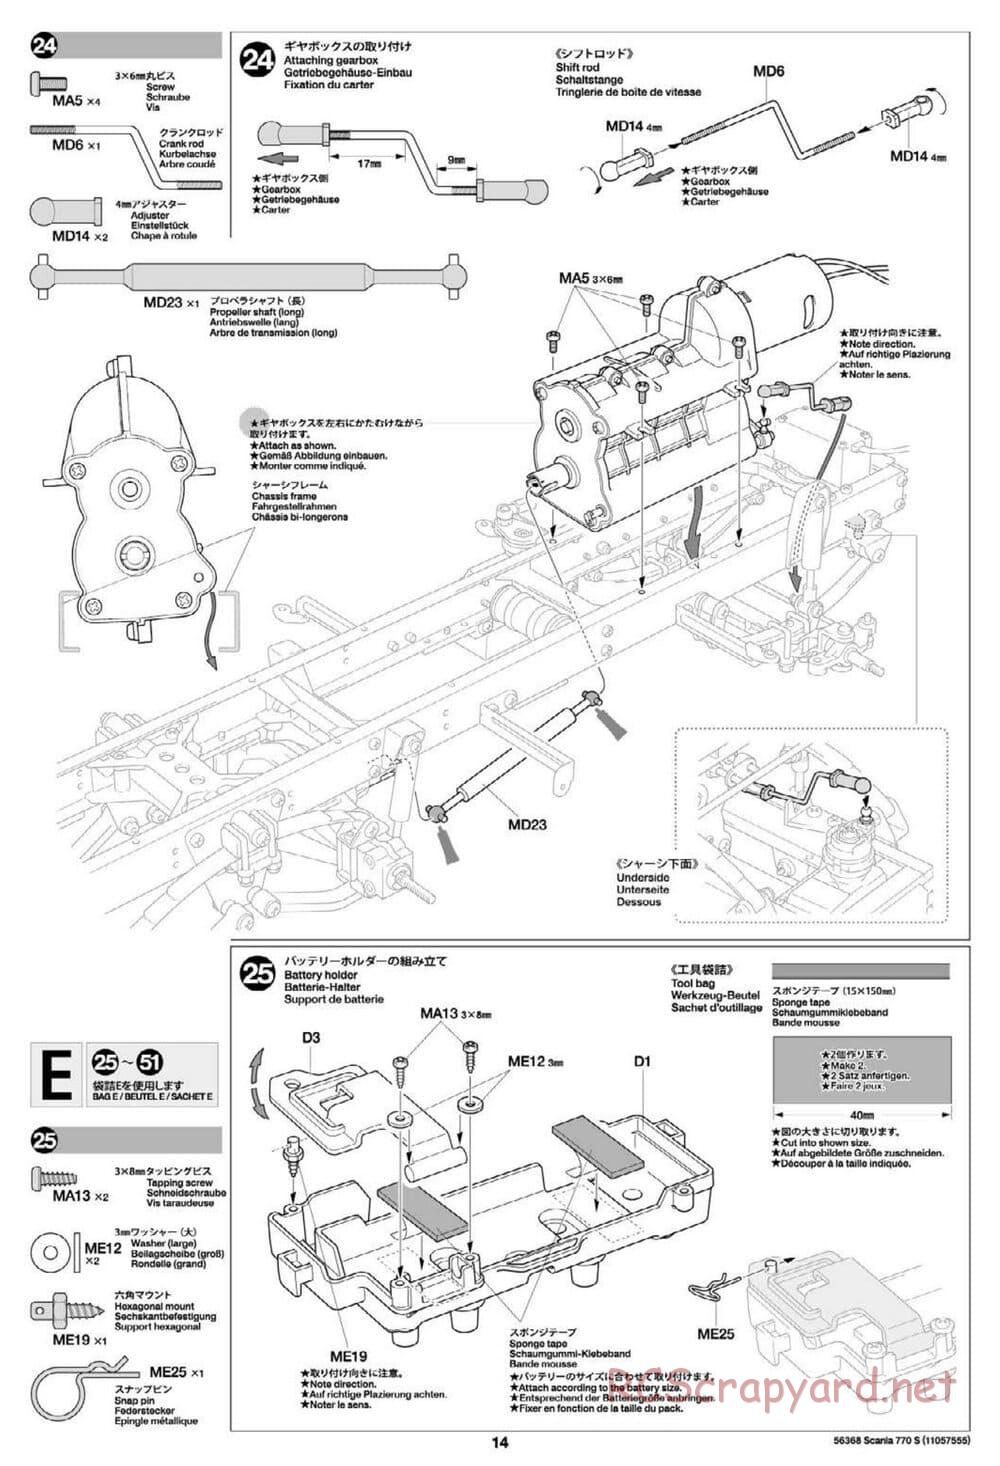 Tamiya - Scania 770S 6x4 Tractor Truck Chassis - Manual - Page 14